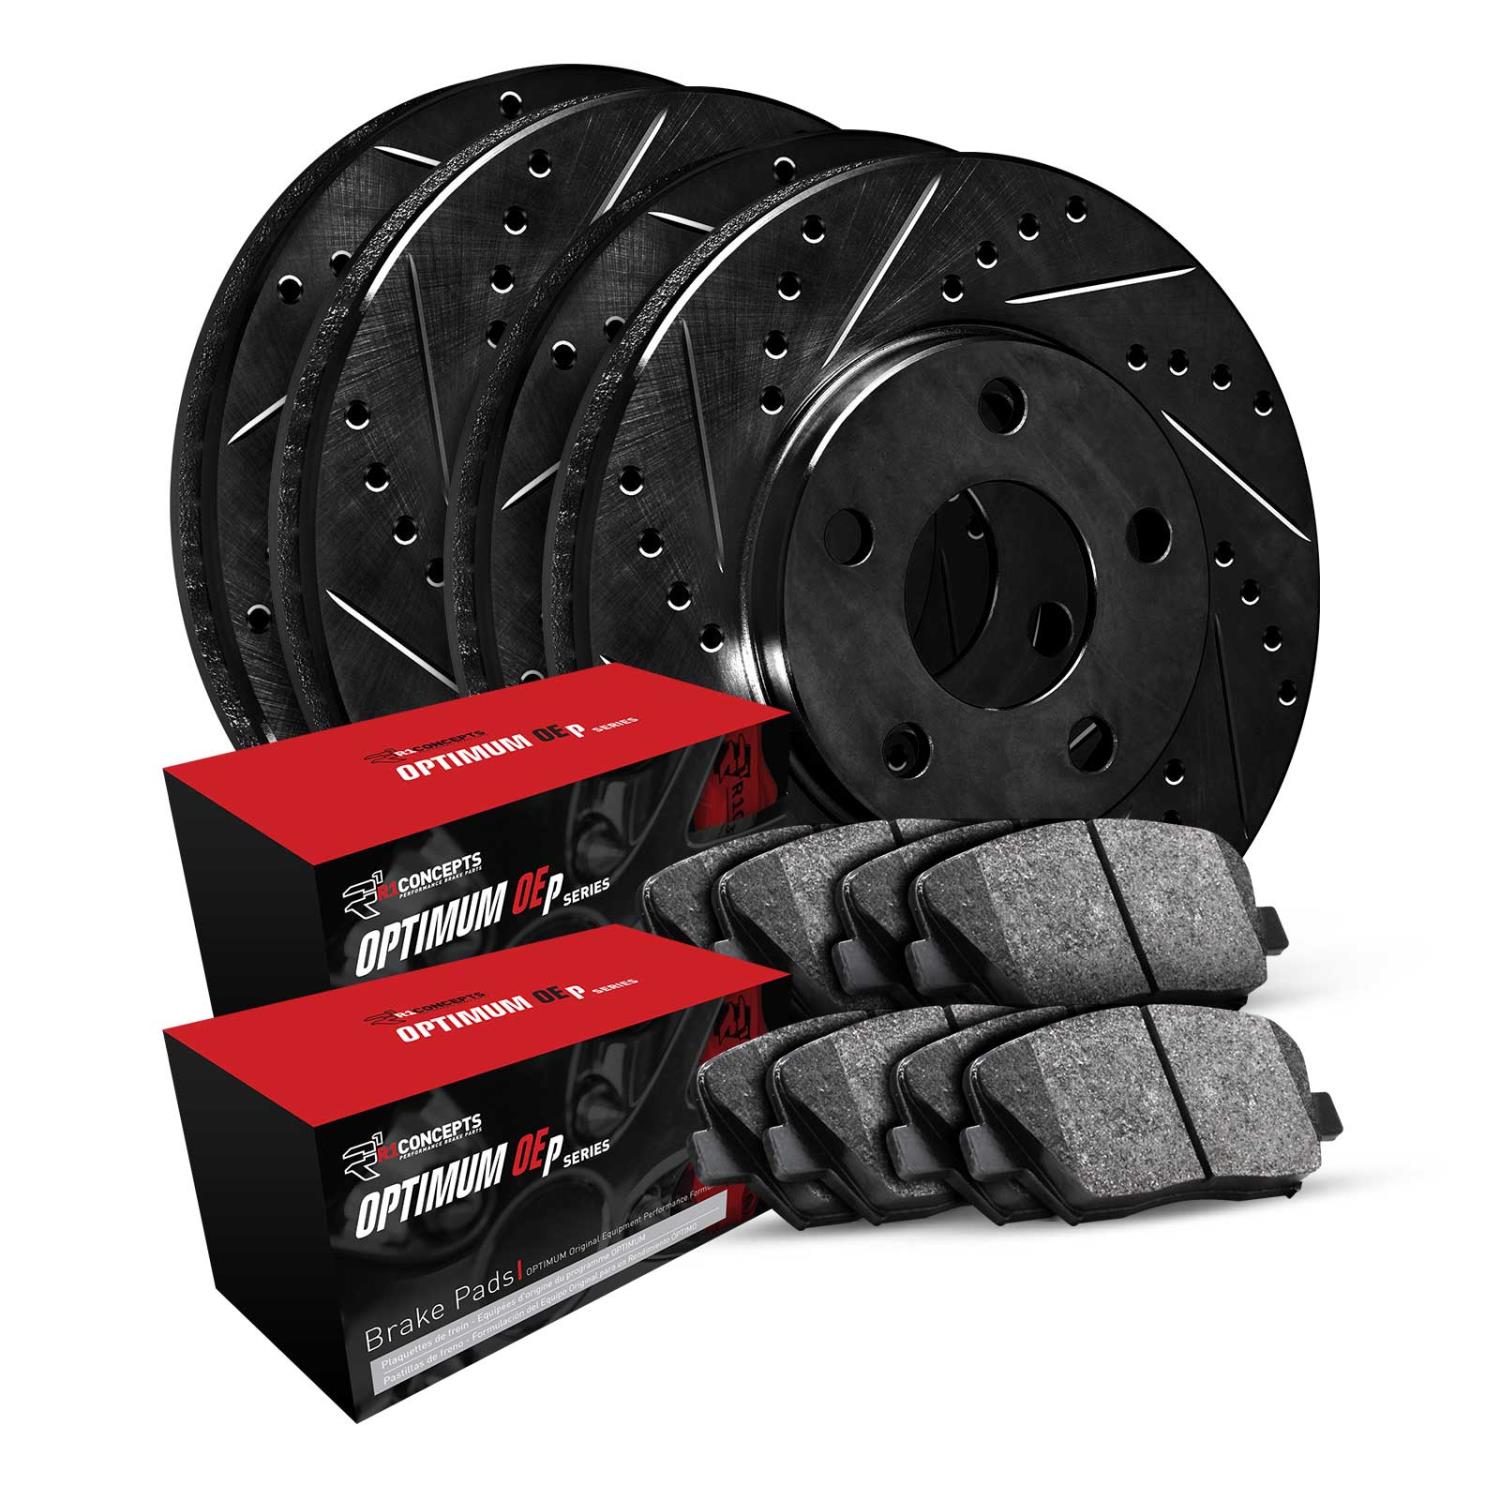 E-Line Drilled & Slotted Black Brake Rotor & Drum Set w/Optimum OE Pads & Shoes, 1992-2000 Fits Multiple Makes/Models